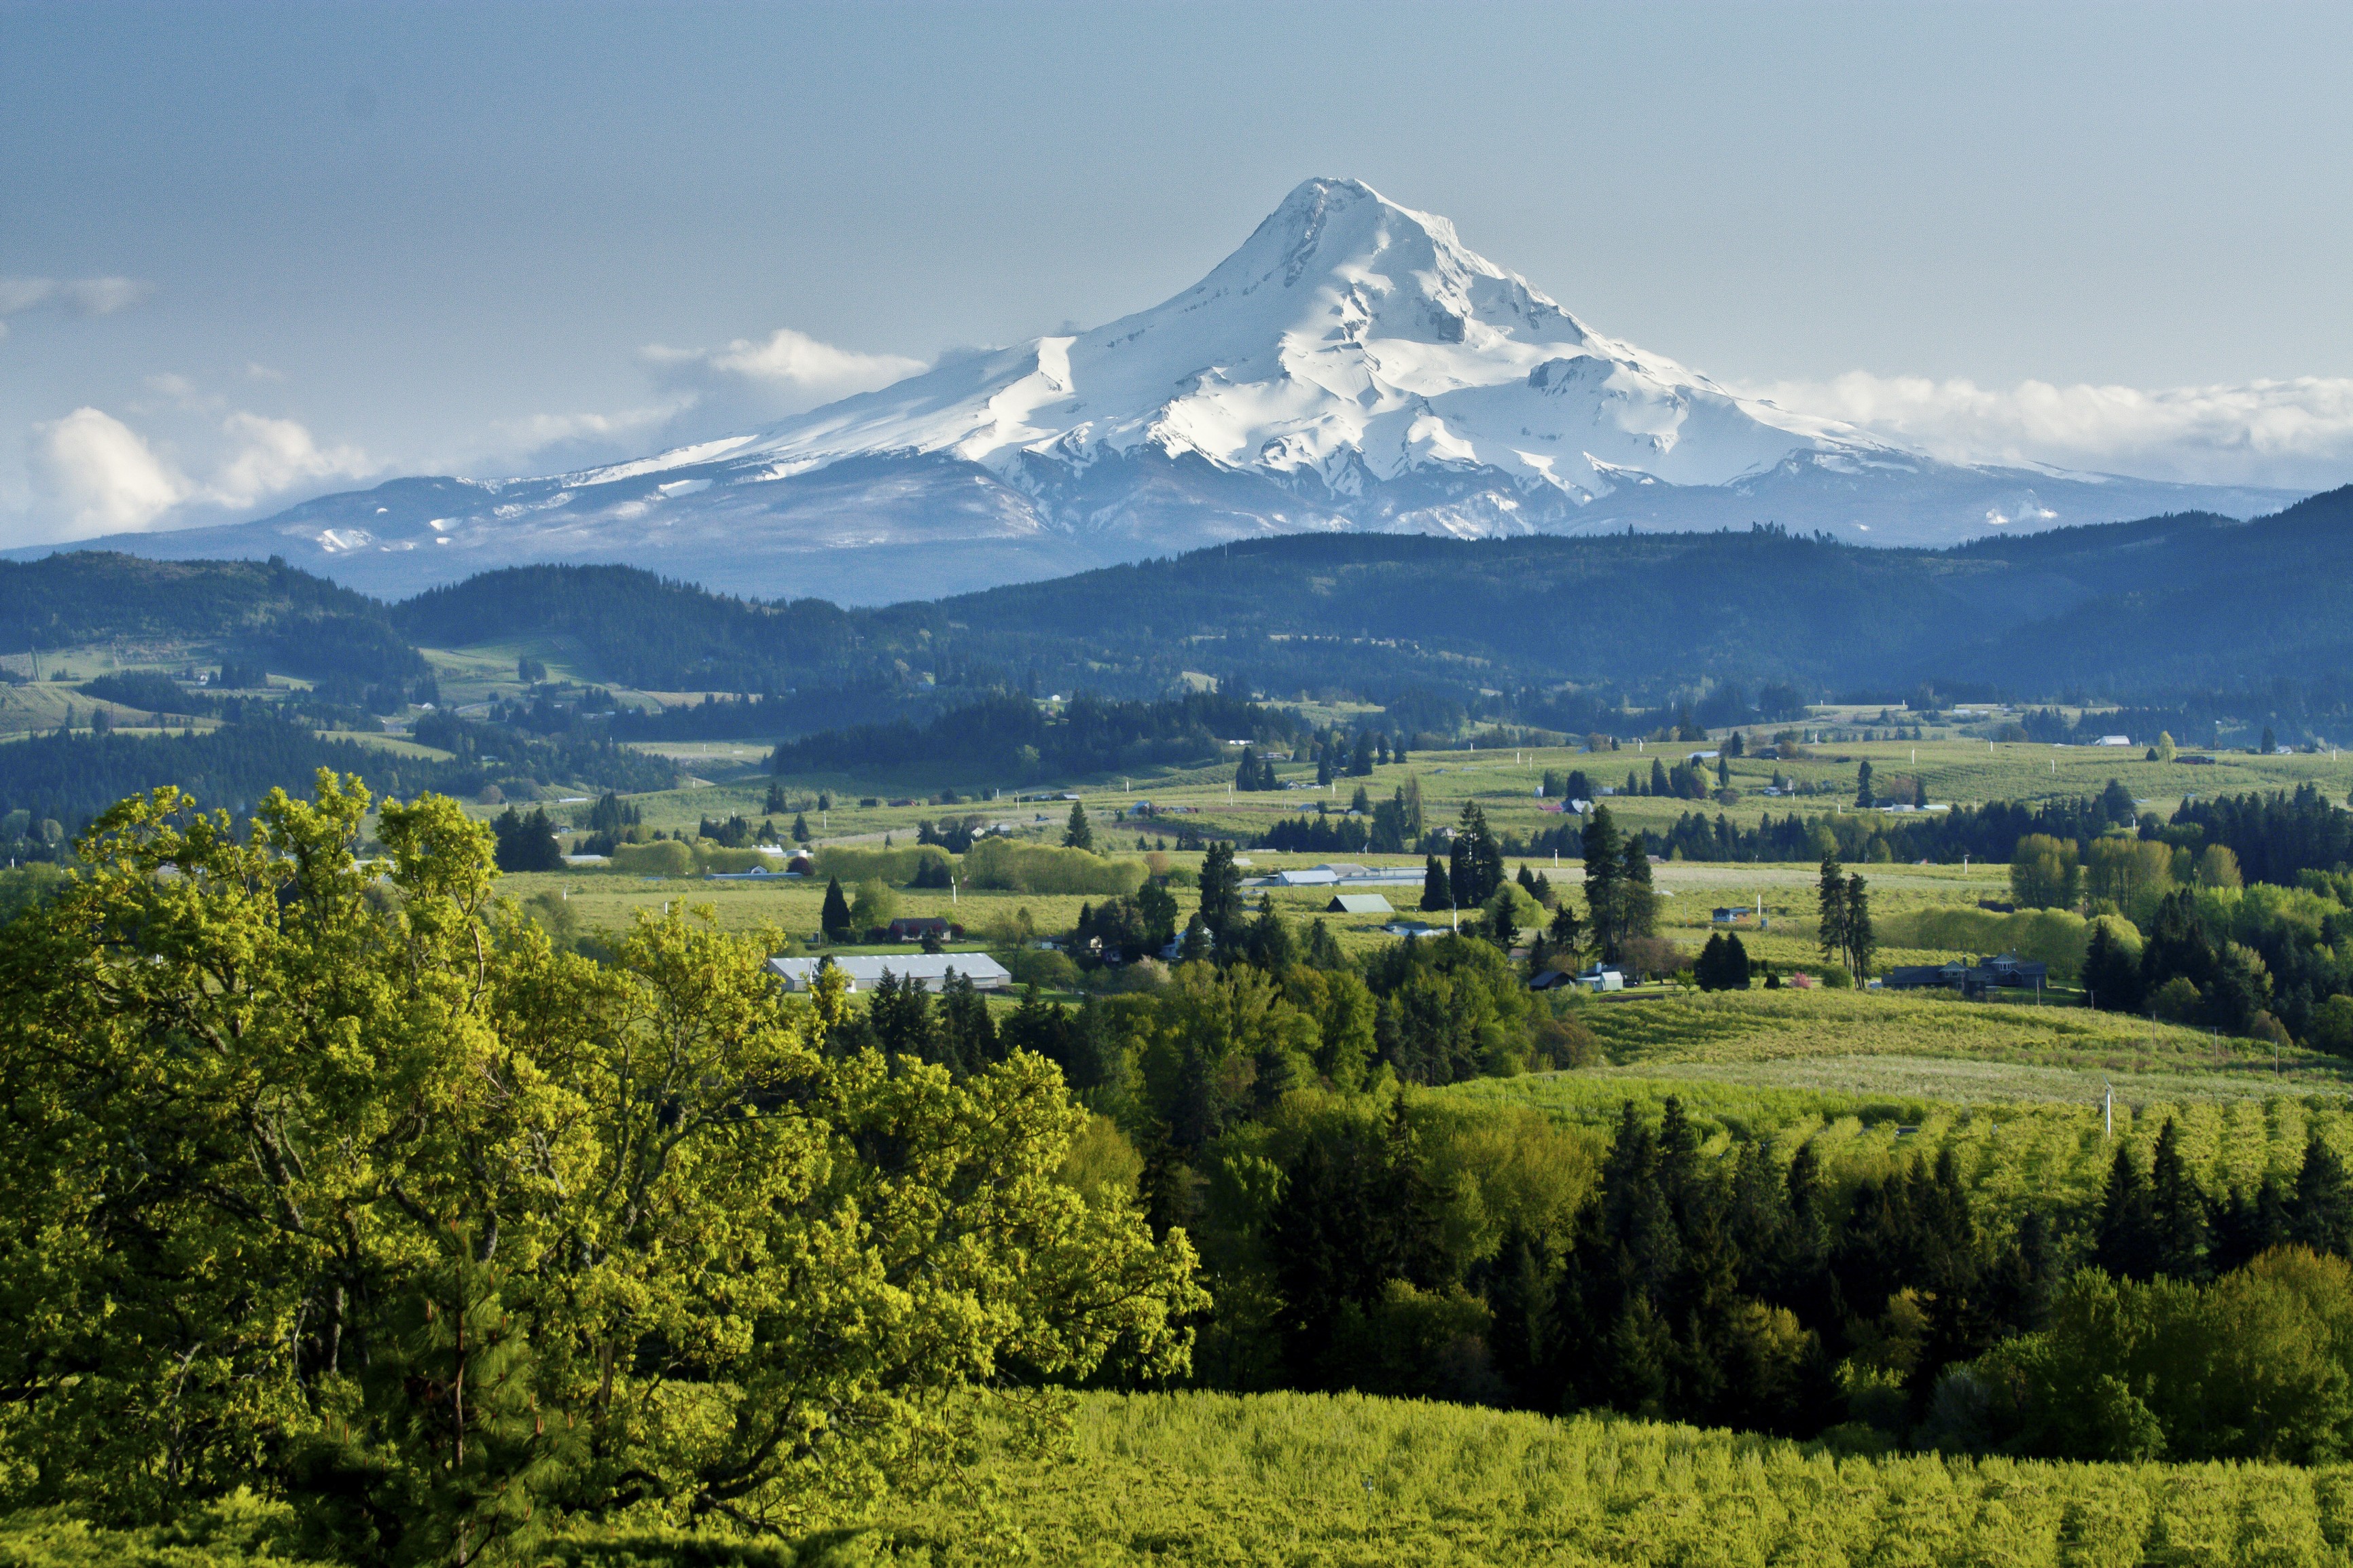 Mount Hood in northern Oregon towers over the vineyards of the Columbia River Valley. Photo: Shutterstock